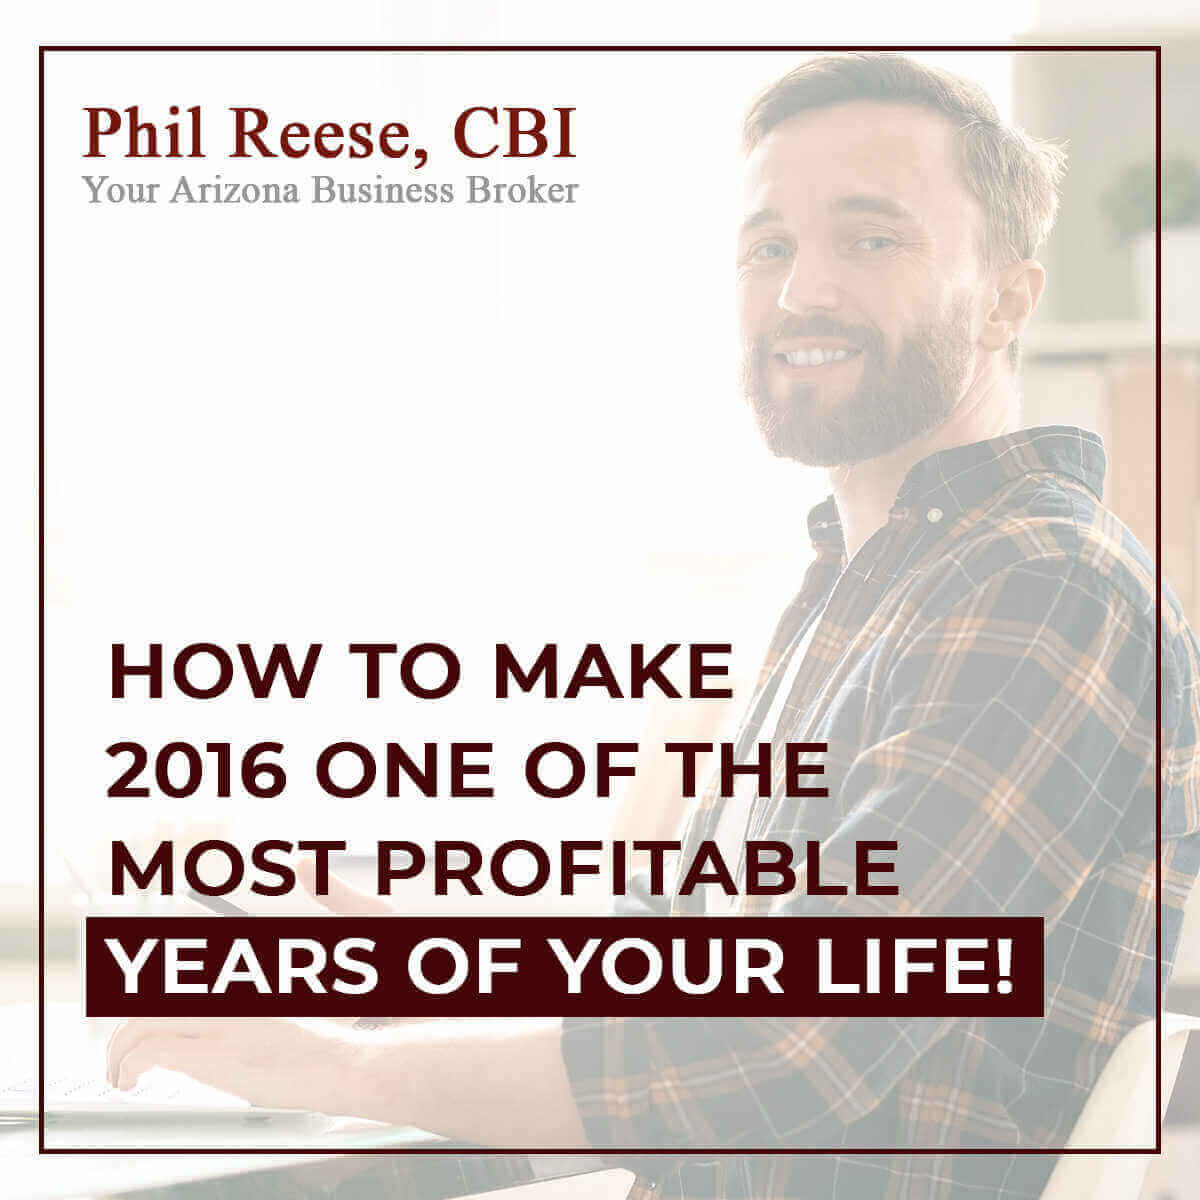 How To Make 2016 One Of The Most Profitable Years of Your Life